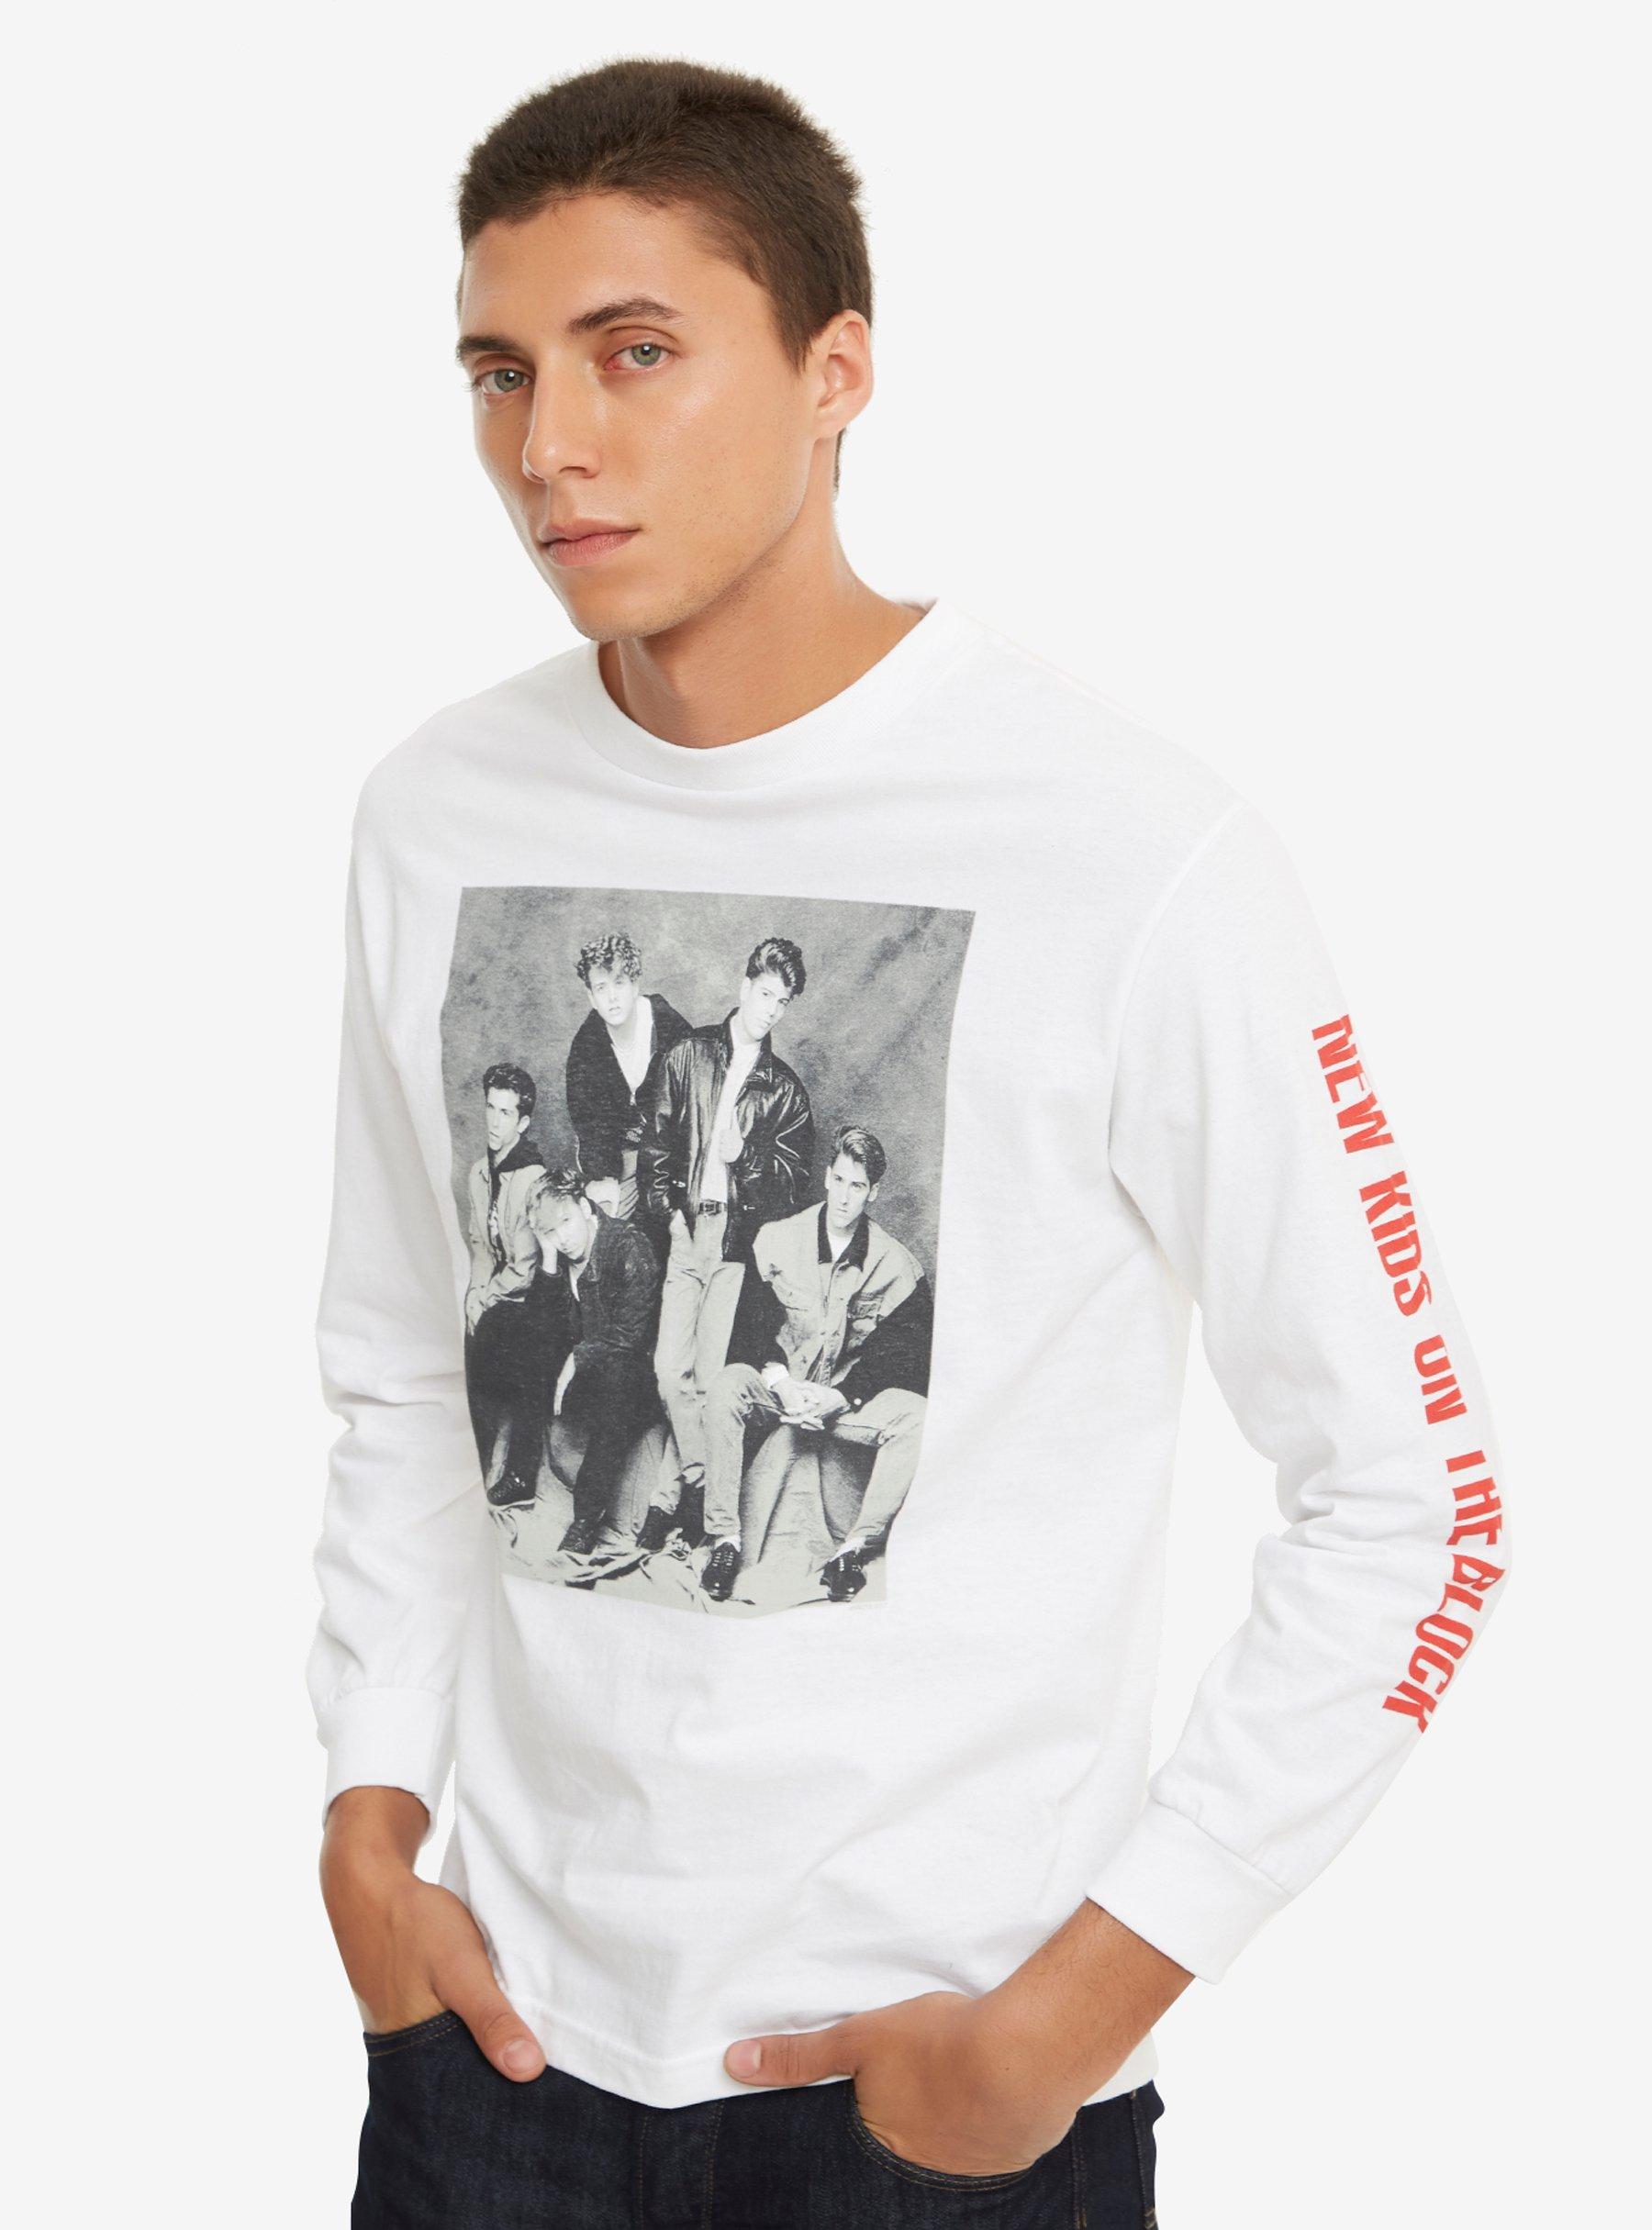 New Kids On The Block The Total Package Tour Long-Sleeve T-Shirt | Hot ...